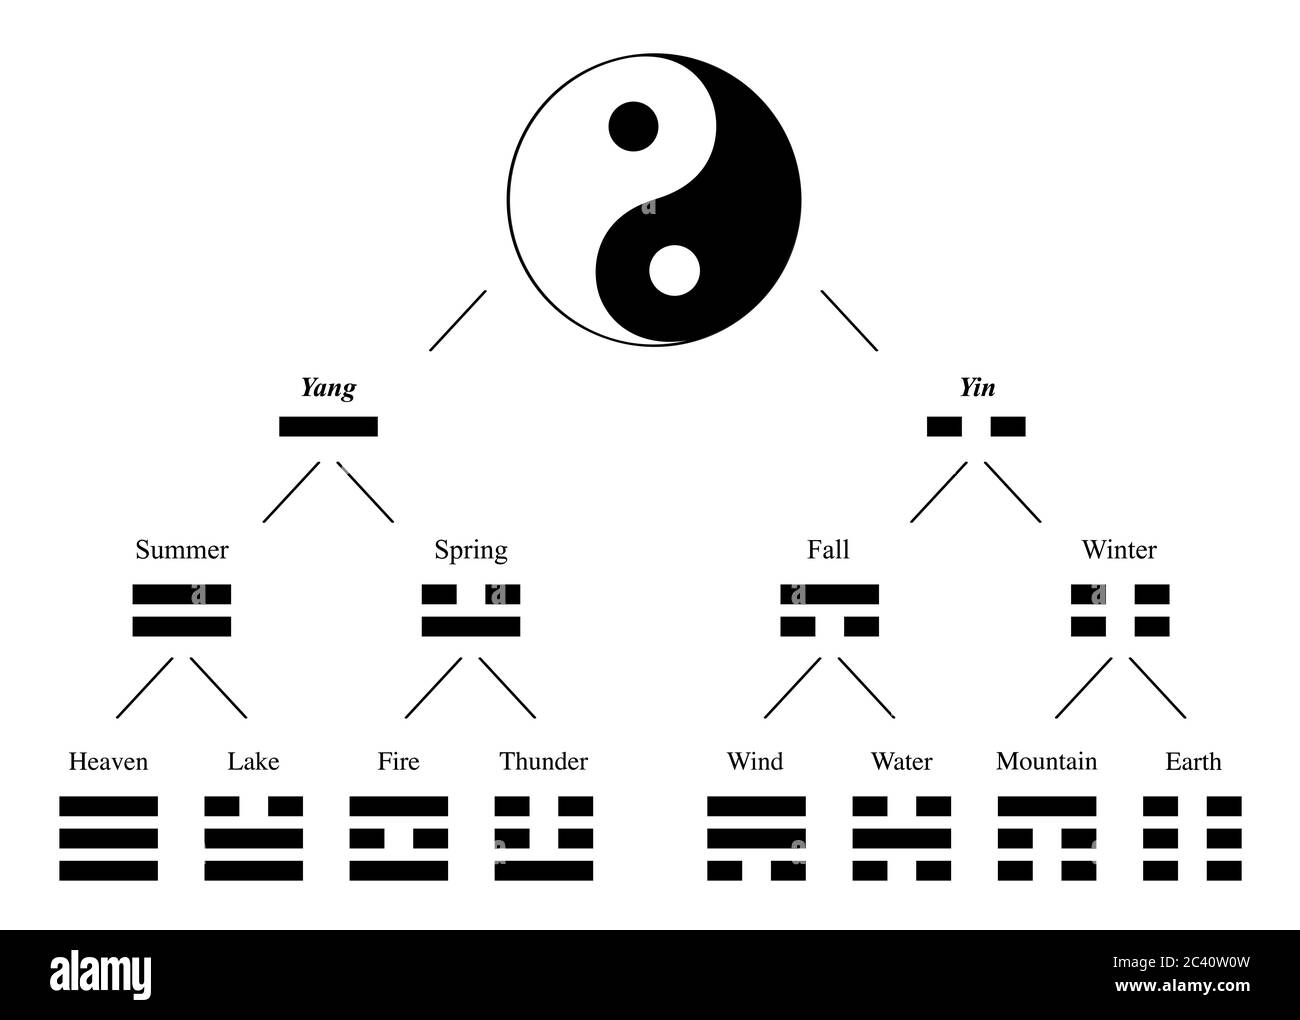 Trigrams and Yin Yang. Development and combination chart with names of spiritual meanings - table of symbols from Bagua of I Ching. Stock Photo